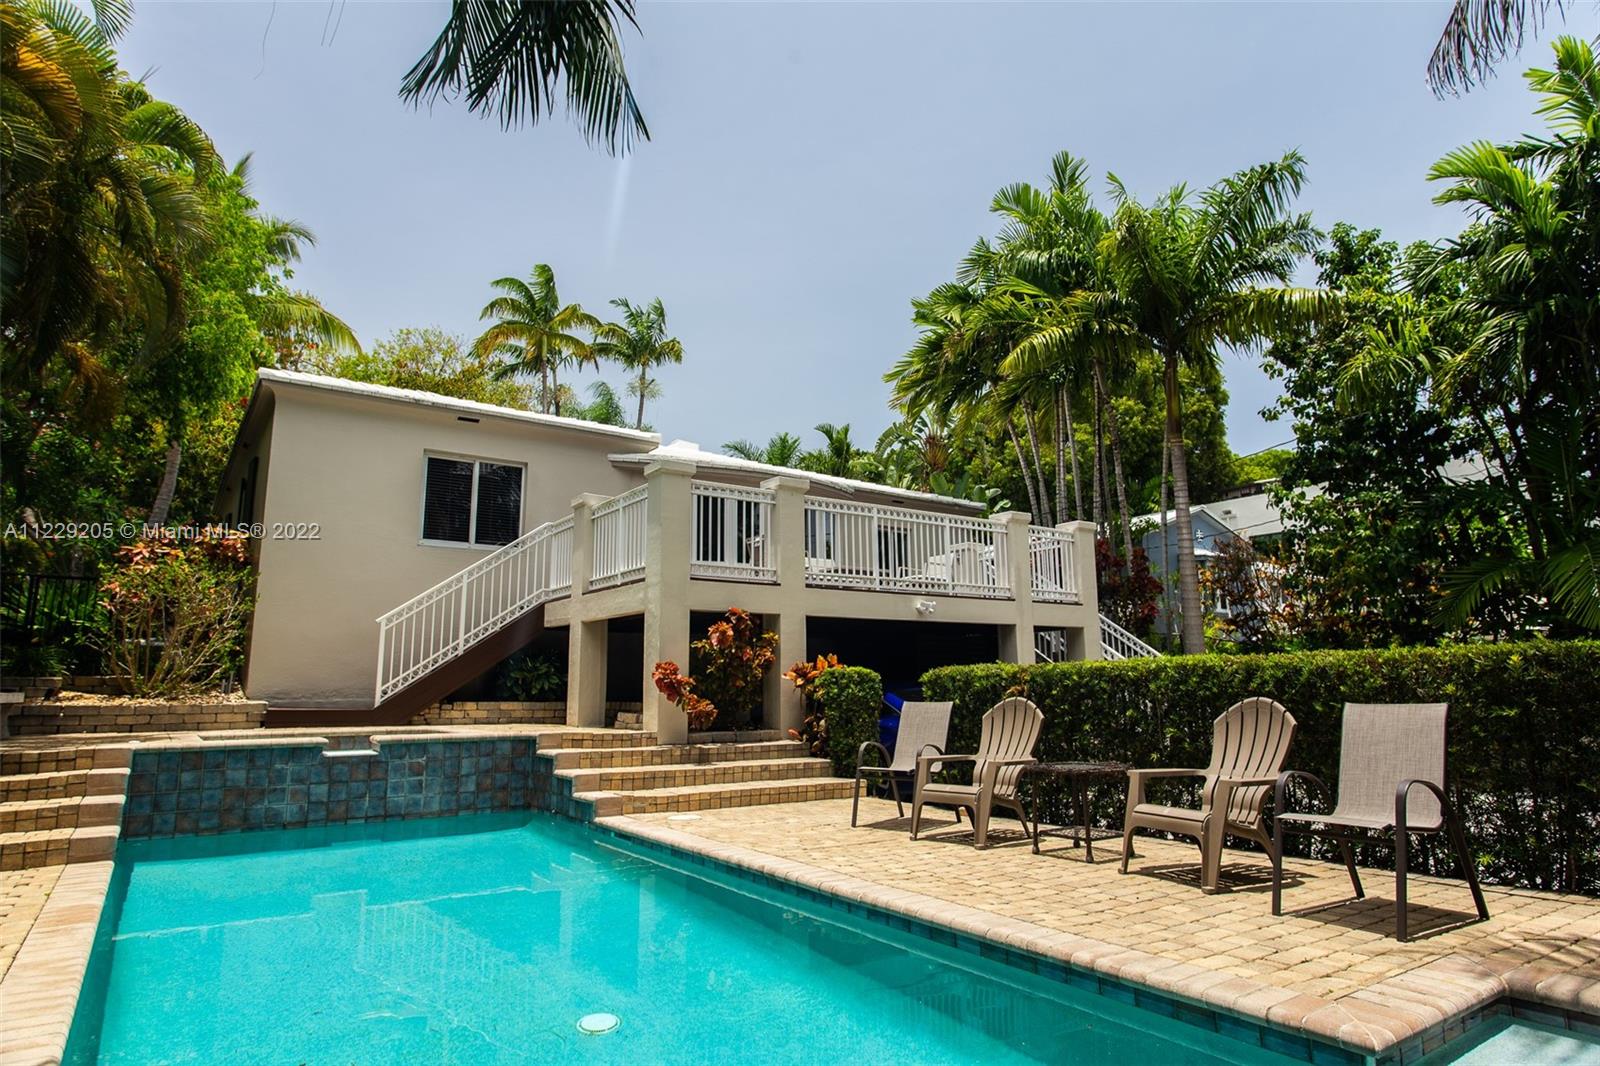 This is a short term vacation rental, contact for pricing and availability. A tropical escape with lush landscaping and a private pool. This home is not only peacefully located in the quiet, residential and highly sought after neighborhood of Victoria Park, it is also centrally situated equidistant to both downtown Fort Lauderdale and its world class beaches! A wonderful opportunity for families traveling for either business or pleasure, or friends passing through to bask in the sites and sounds of sunny South Florida!